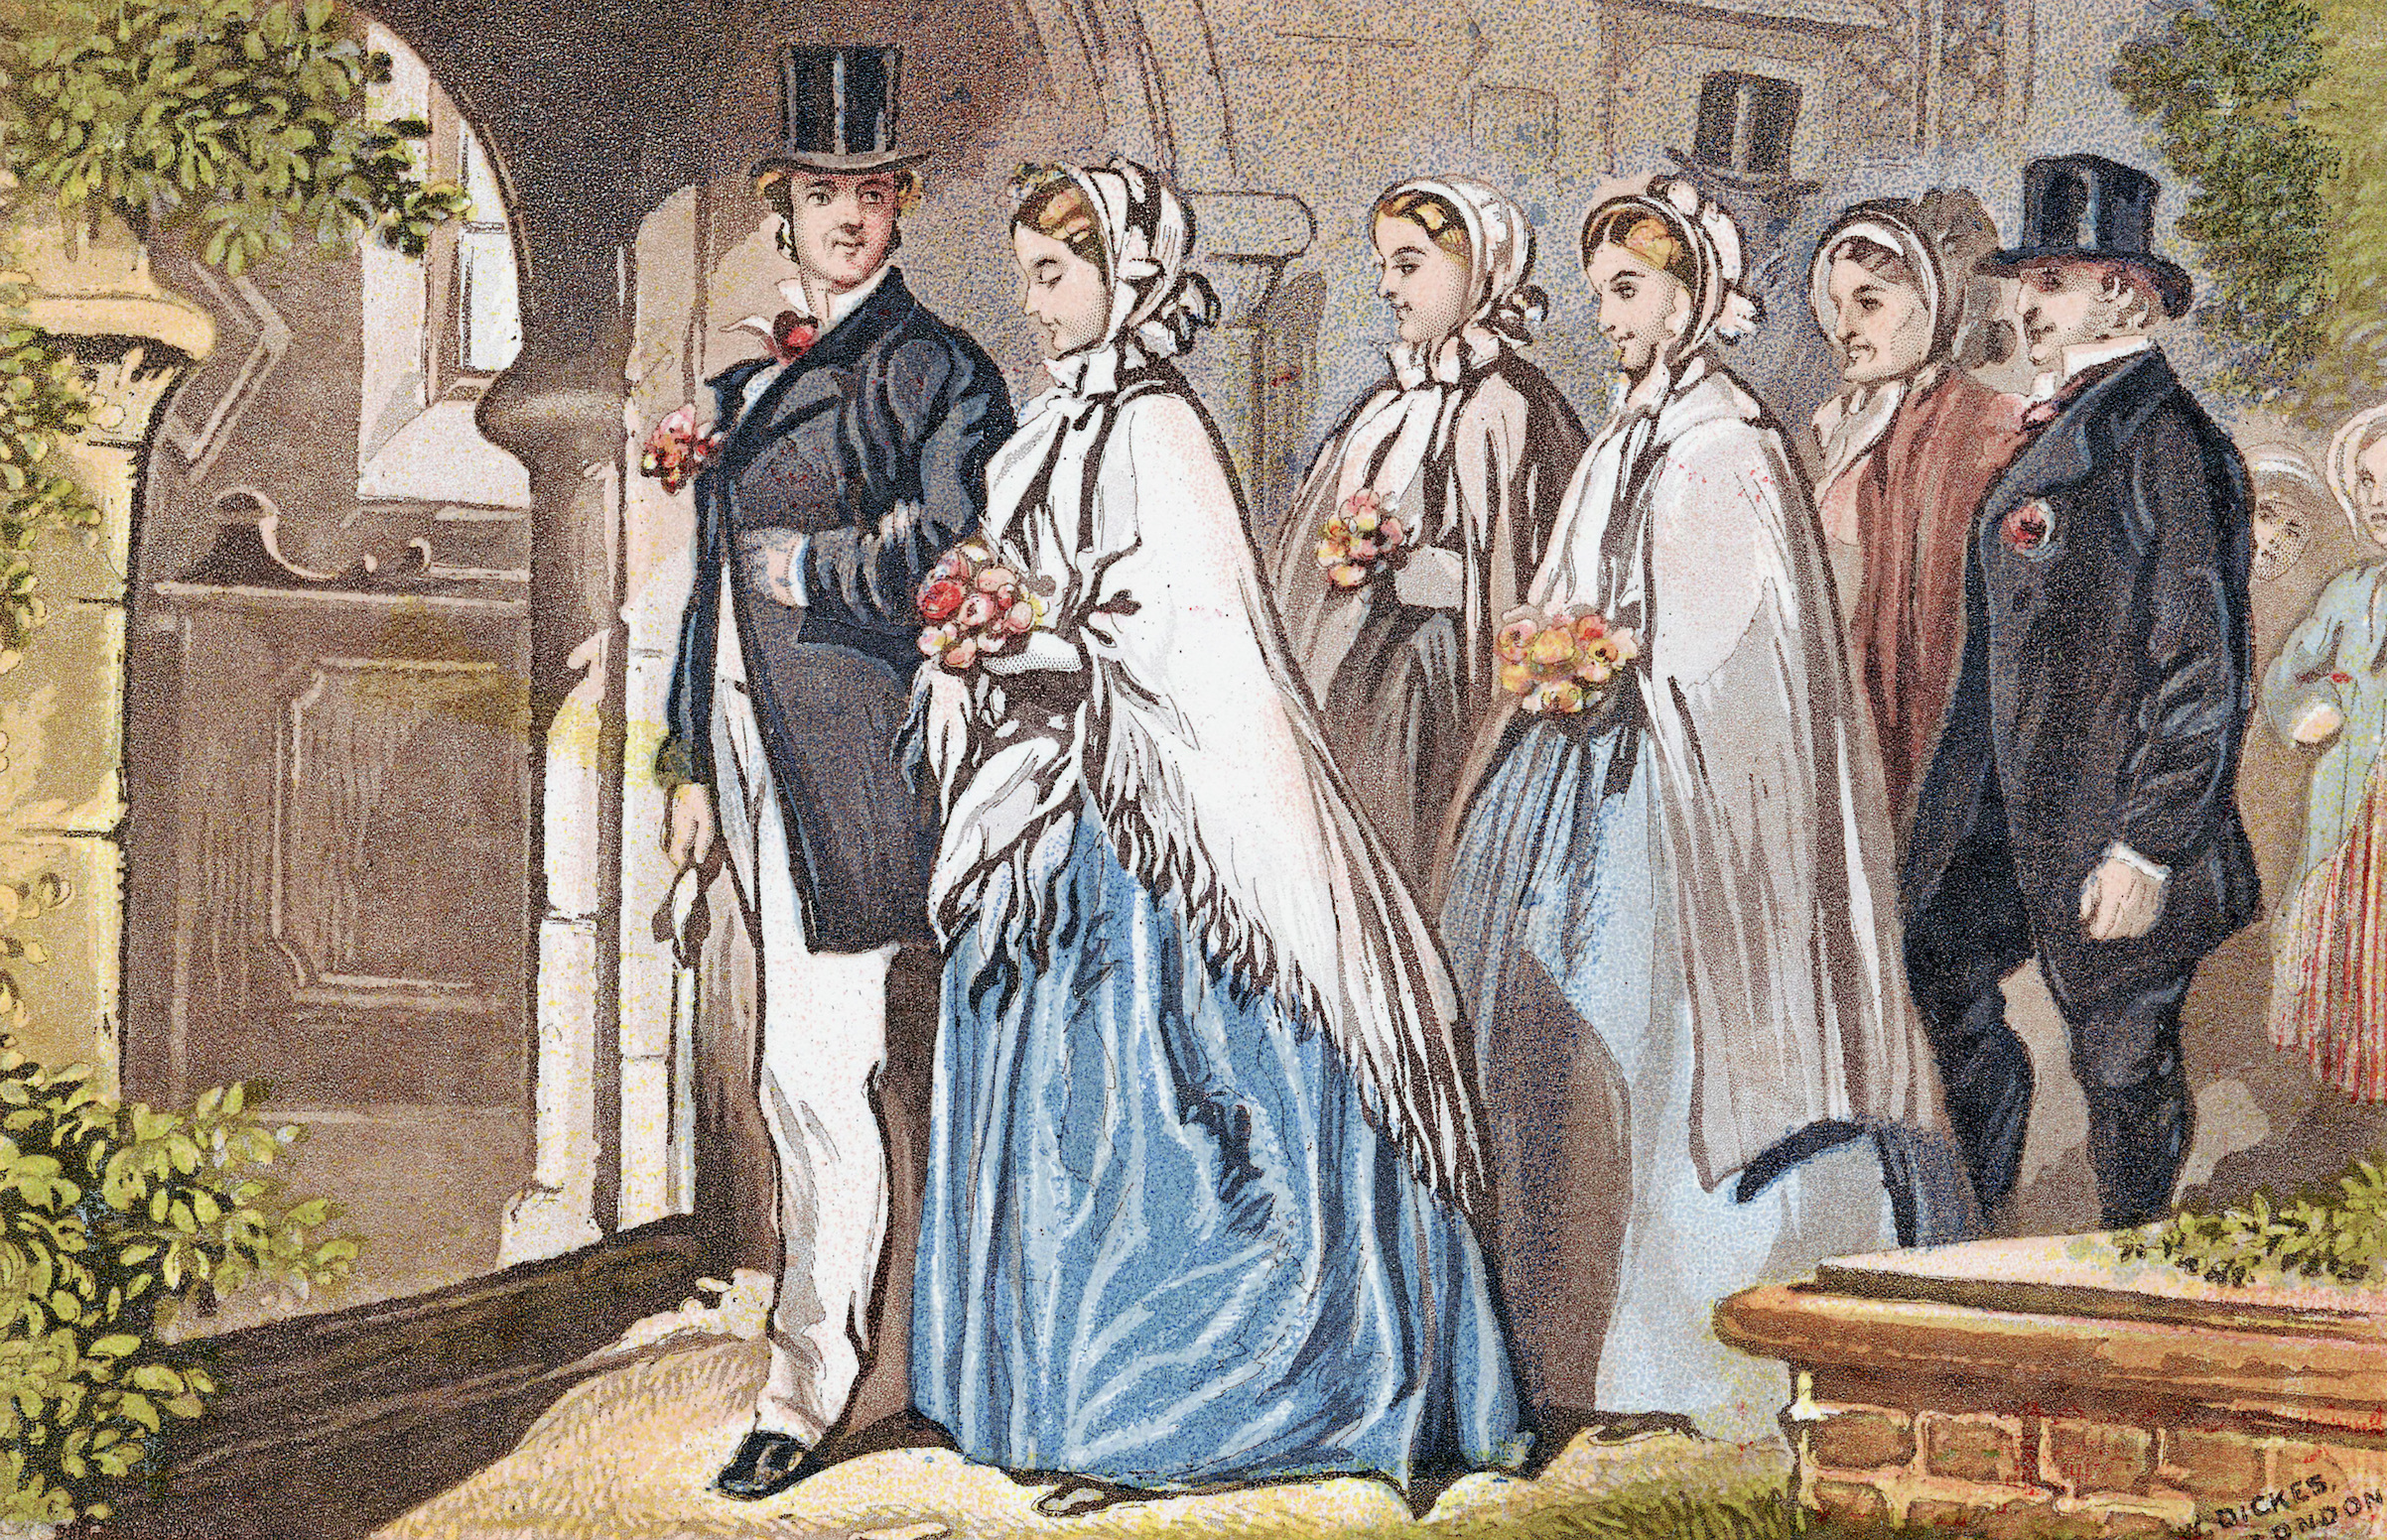 'The Wedding Day.' Illustration of a bridal party at the church door about to enter, c. 1885. (Print Collector/Getty Images)